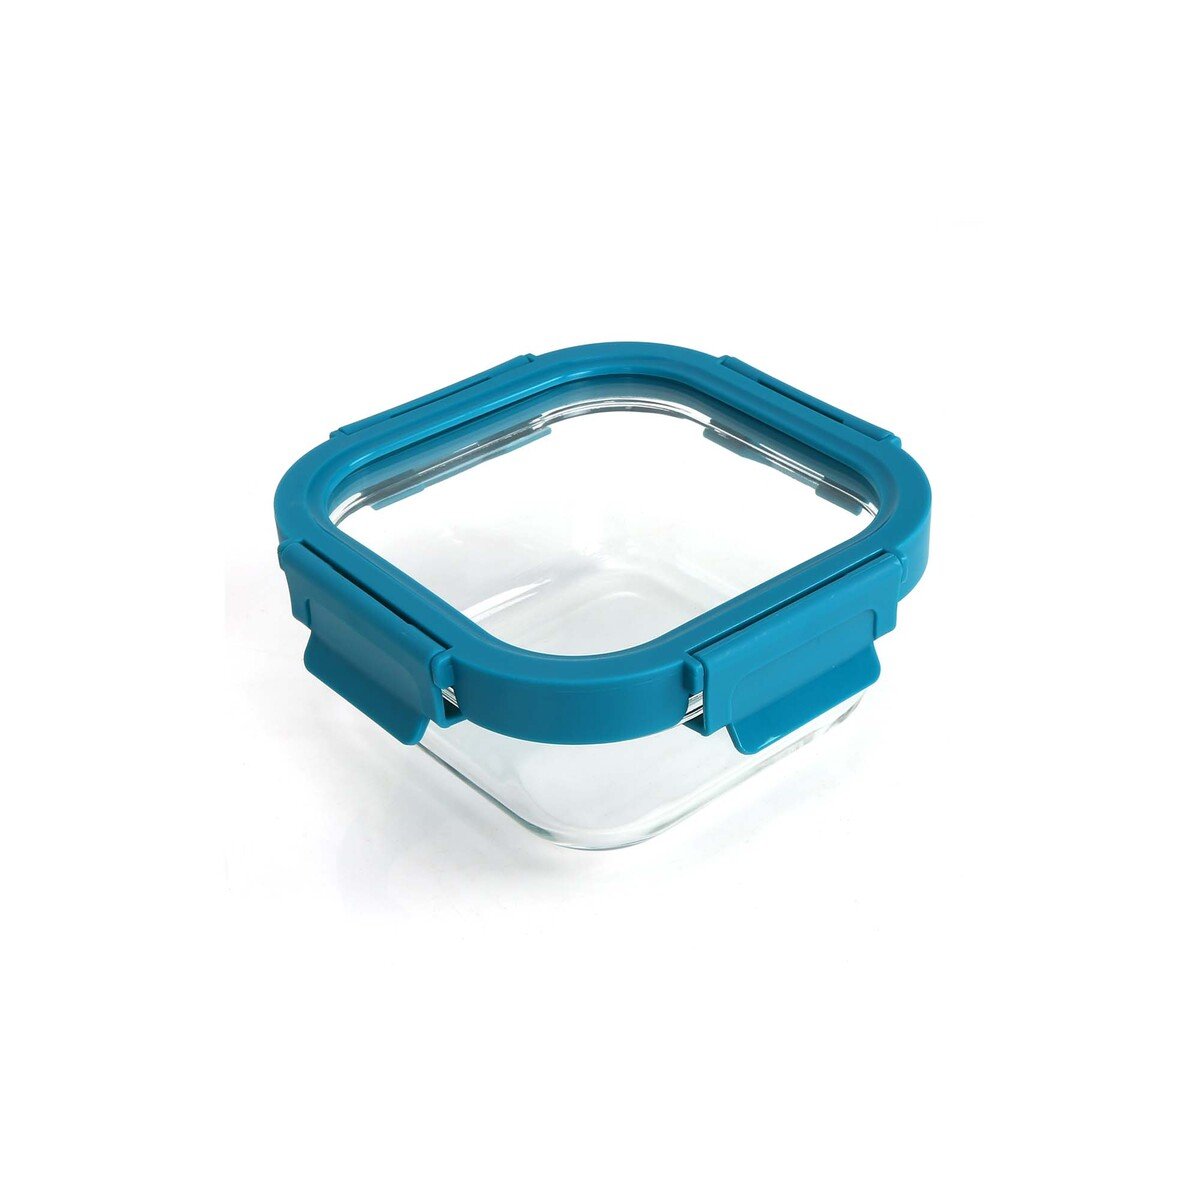 Chefline Square Food Storage Glass Container With Lid, Blue (Teal Blue), 320 ml